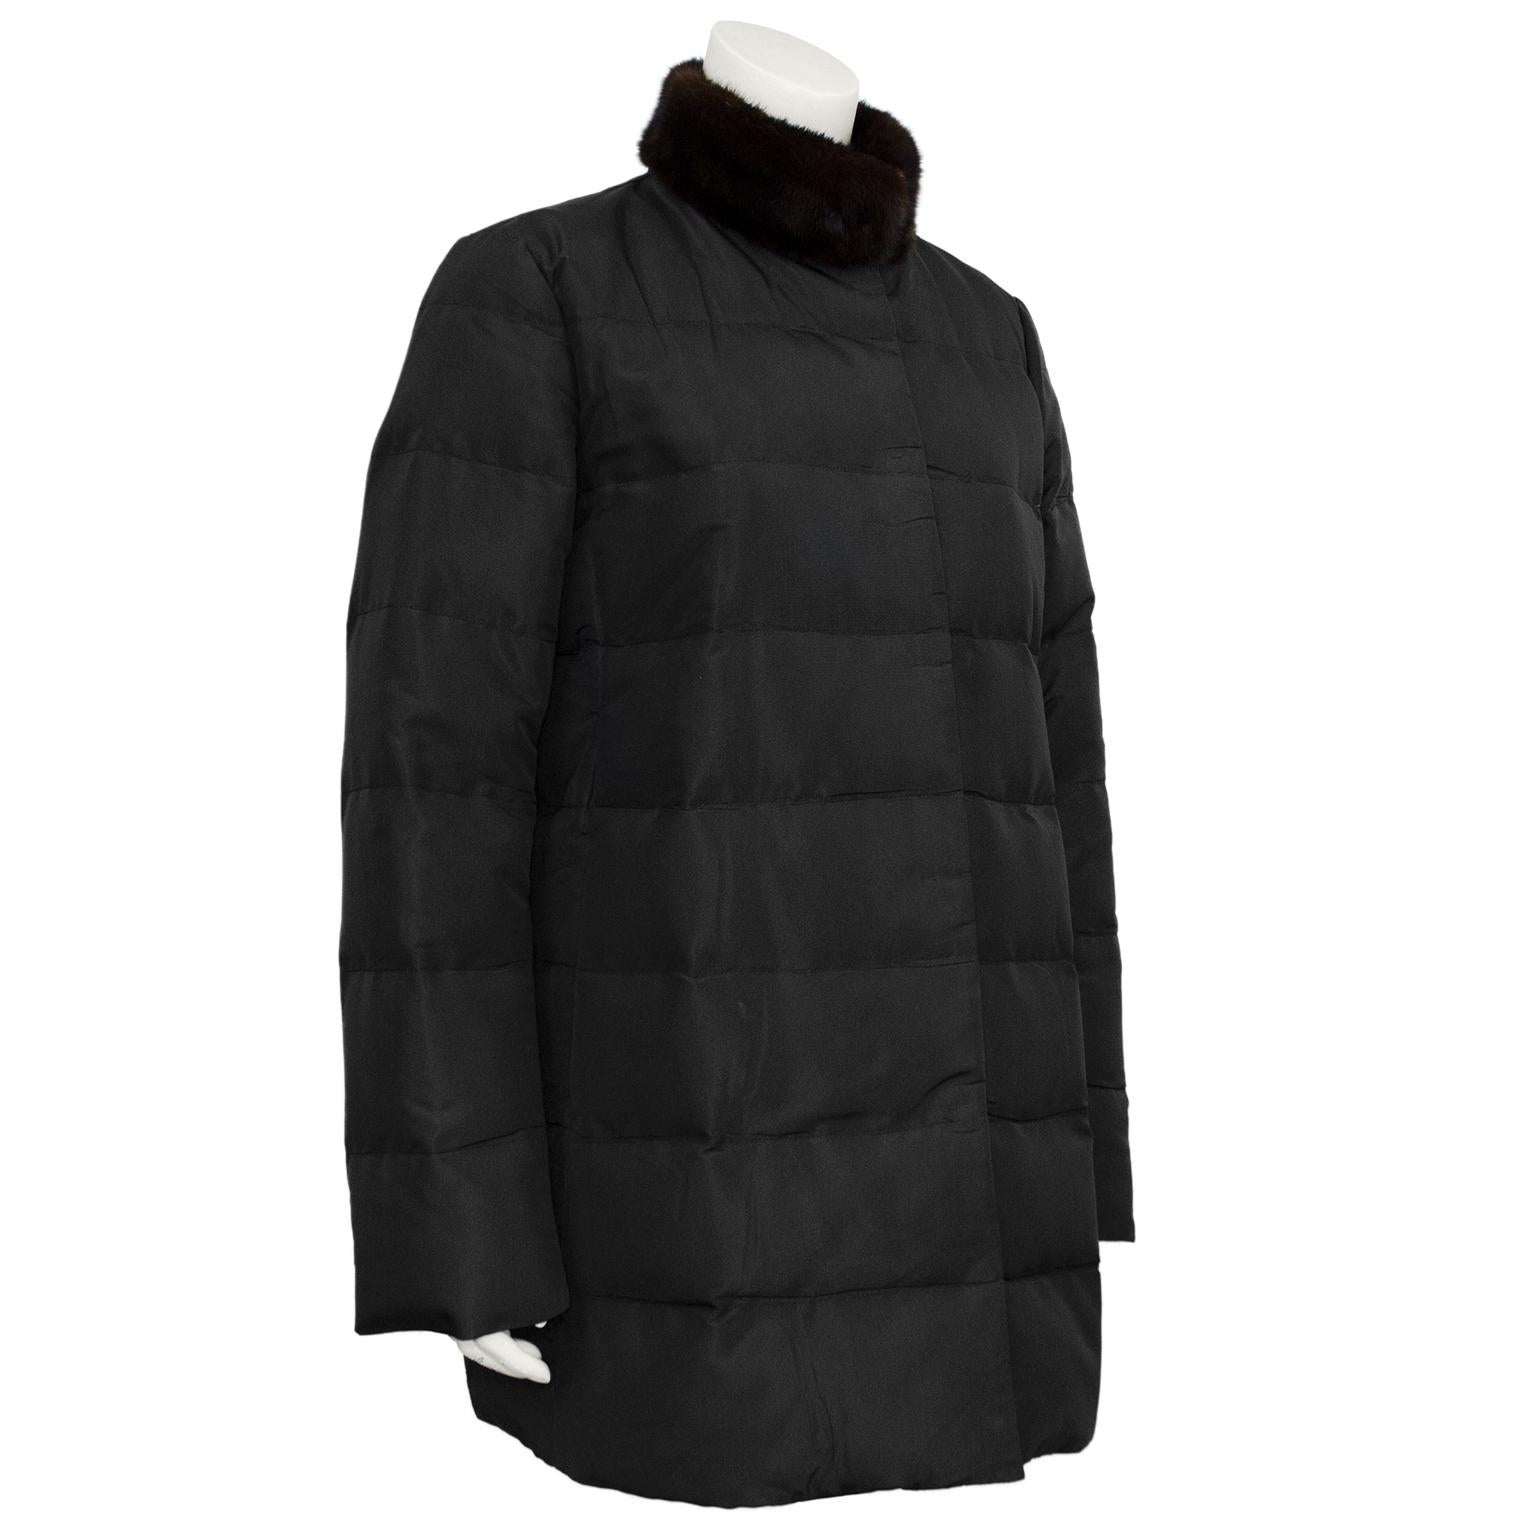 Understated and chic Prada down puffer coat from the 1990s. Black nylon with brown mink collar. Hidden snap buttons down centre front seam. Black grosgrain ribbon trim down both interior centre seams. Vertical slit pockets. Tonal black stitching.